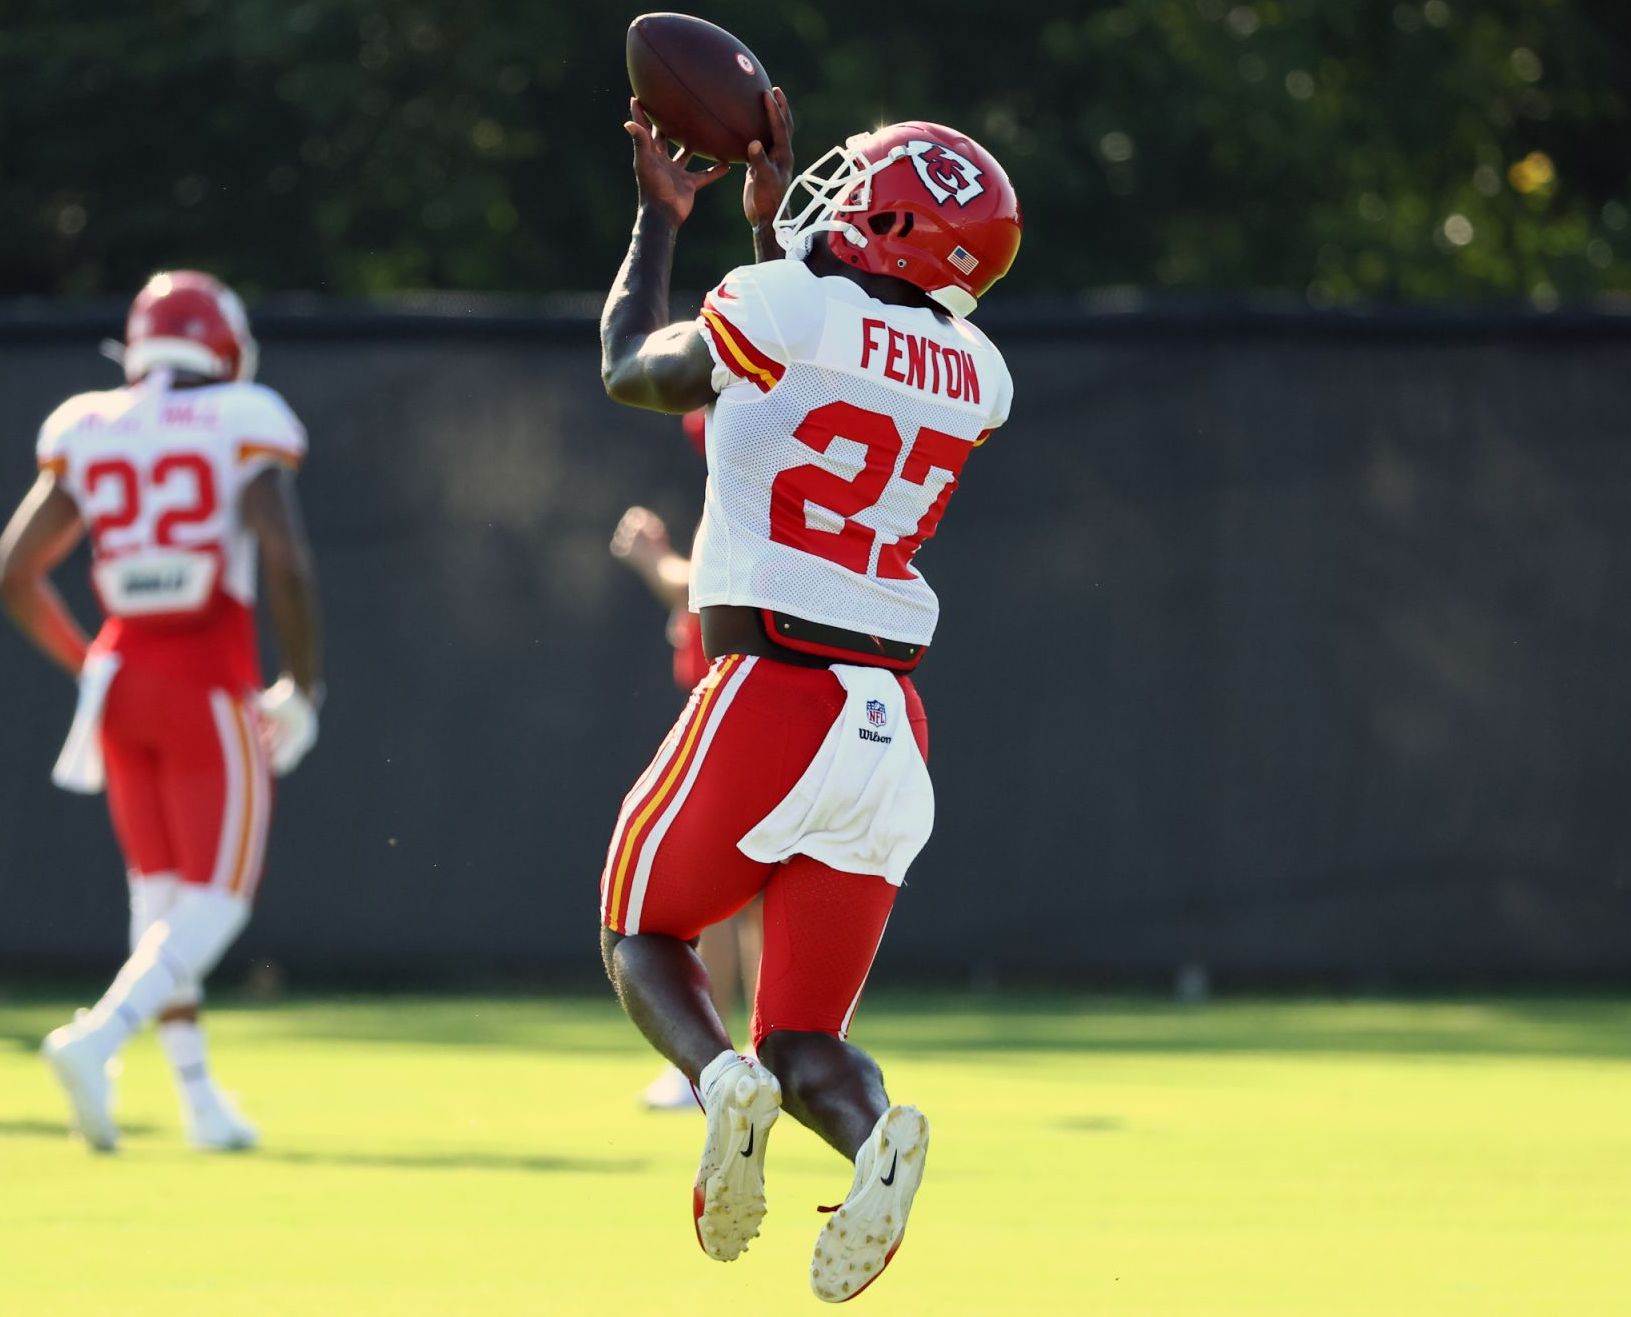 Chiefs Expecting Much From Young Cornerbacks Early in Season